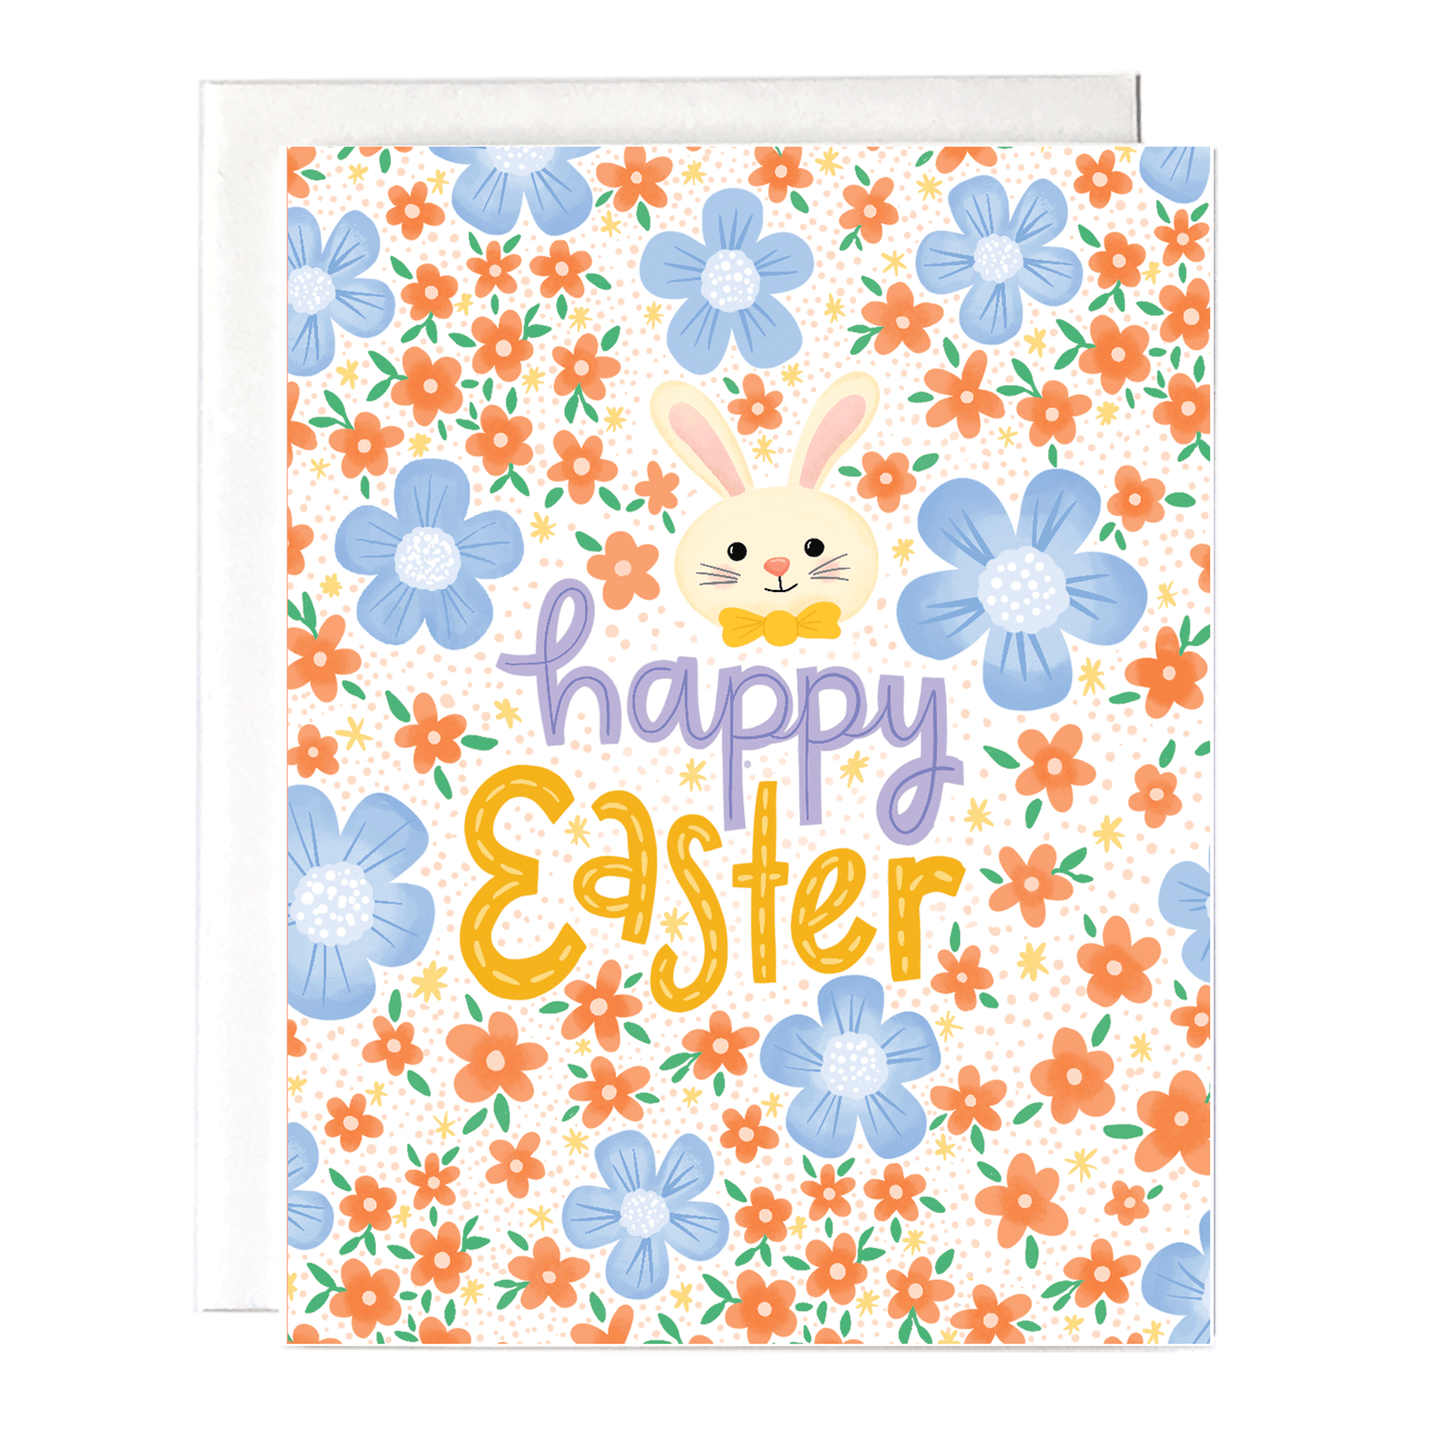 happy easter card with lots of flowers and a cute bunny.